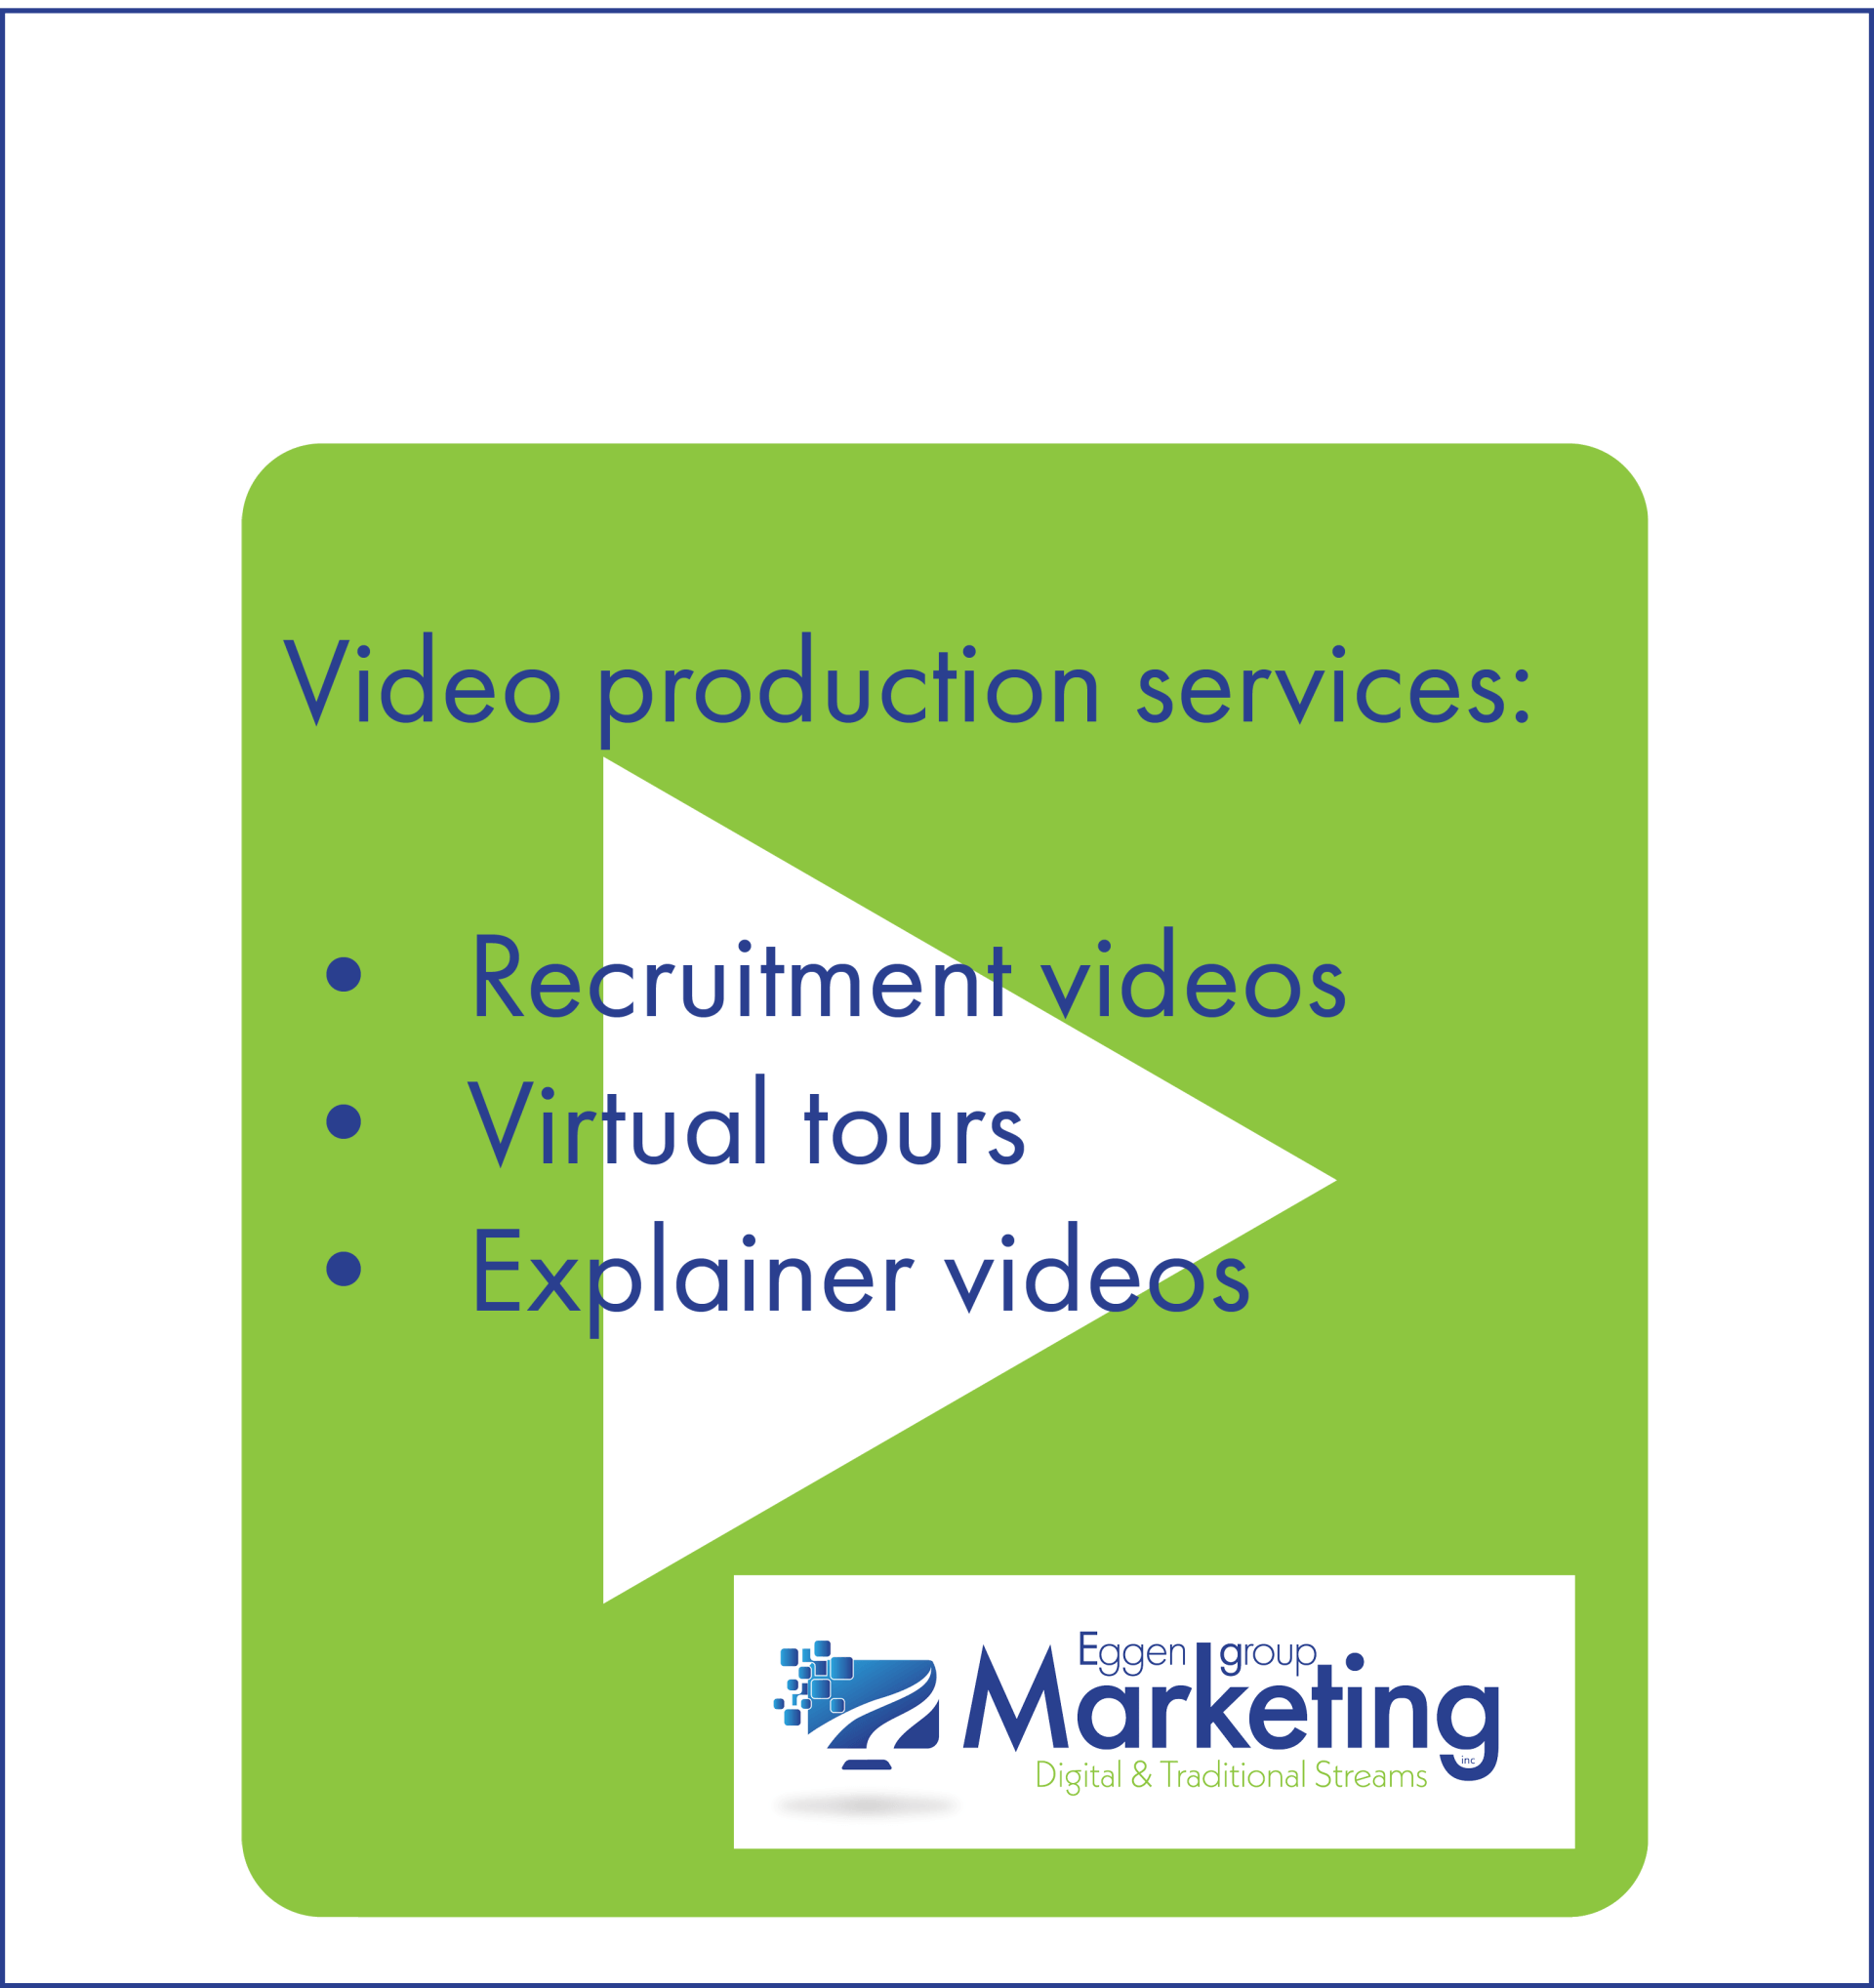 Announcing video production services for recruitment videos, virtual tours, and explainer videos